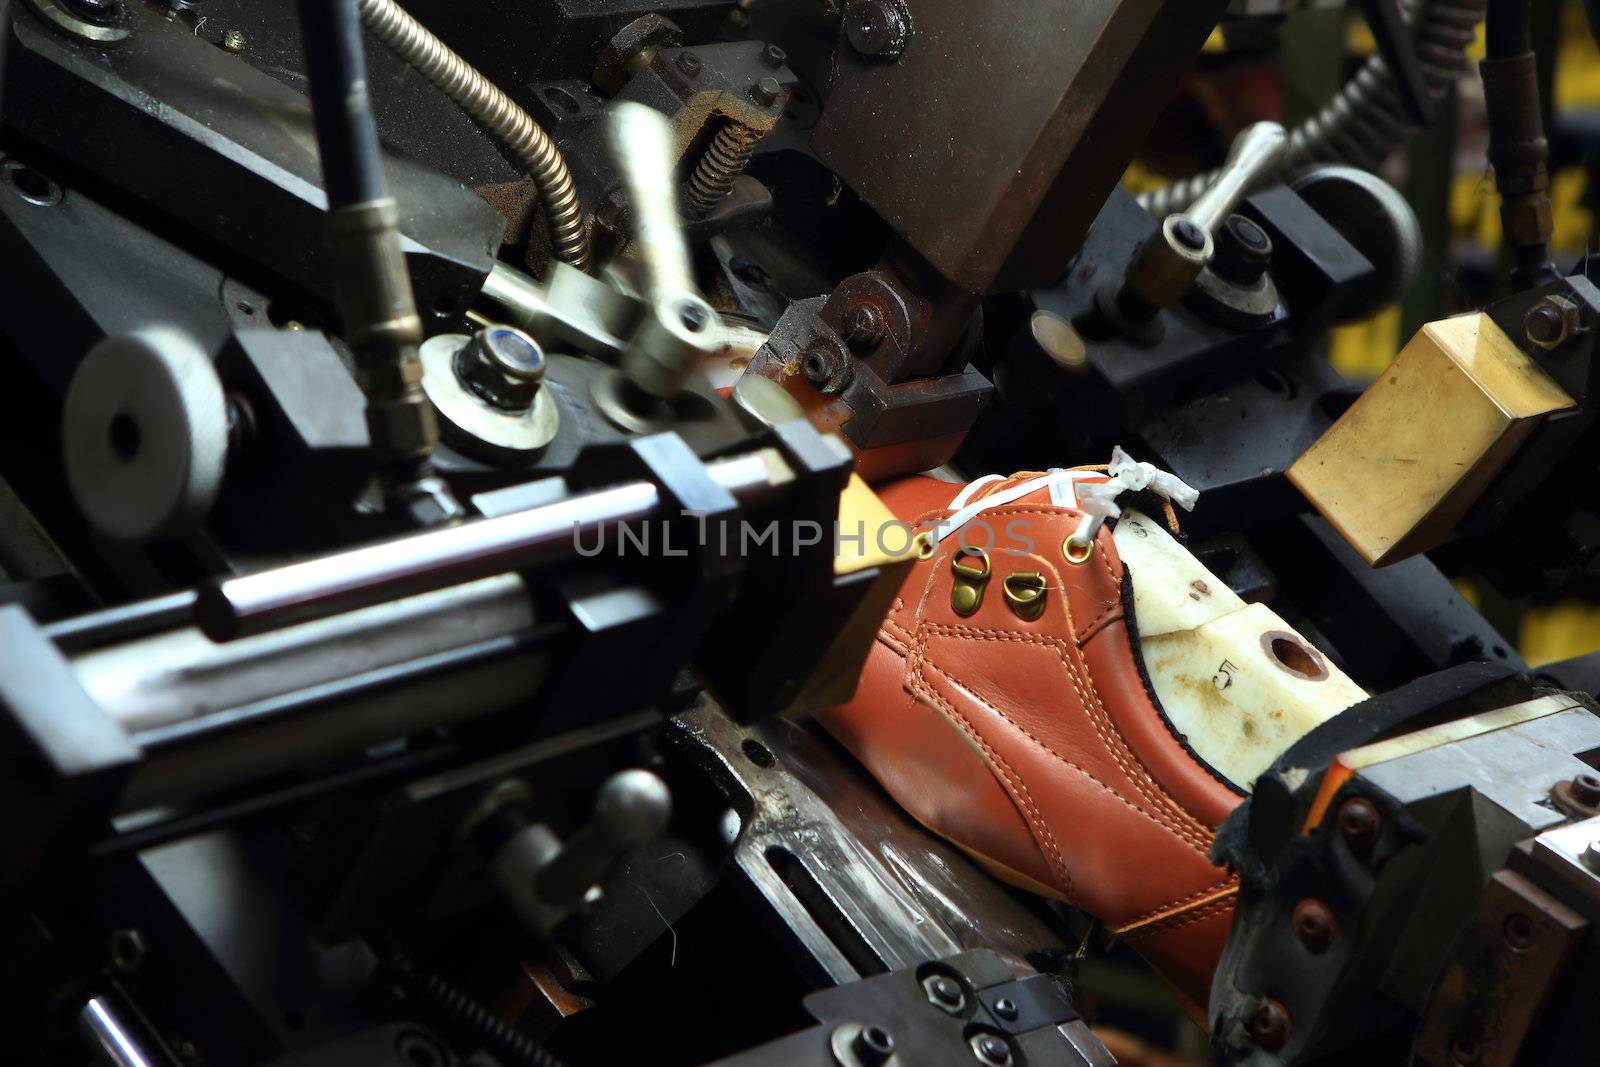 Footwear production by rufous